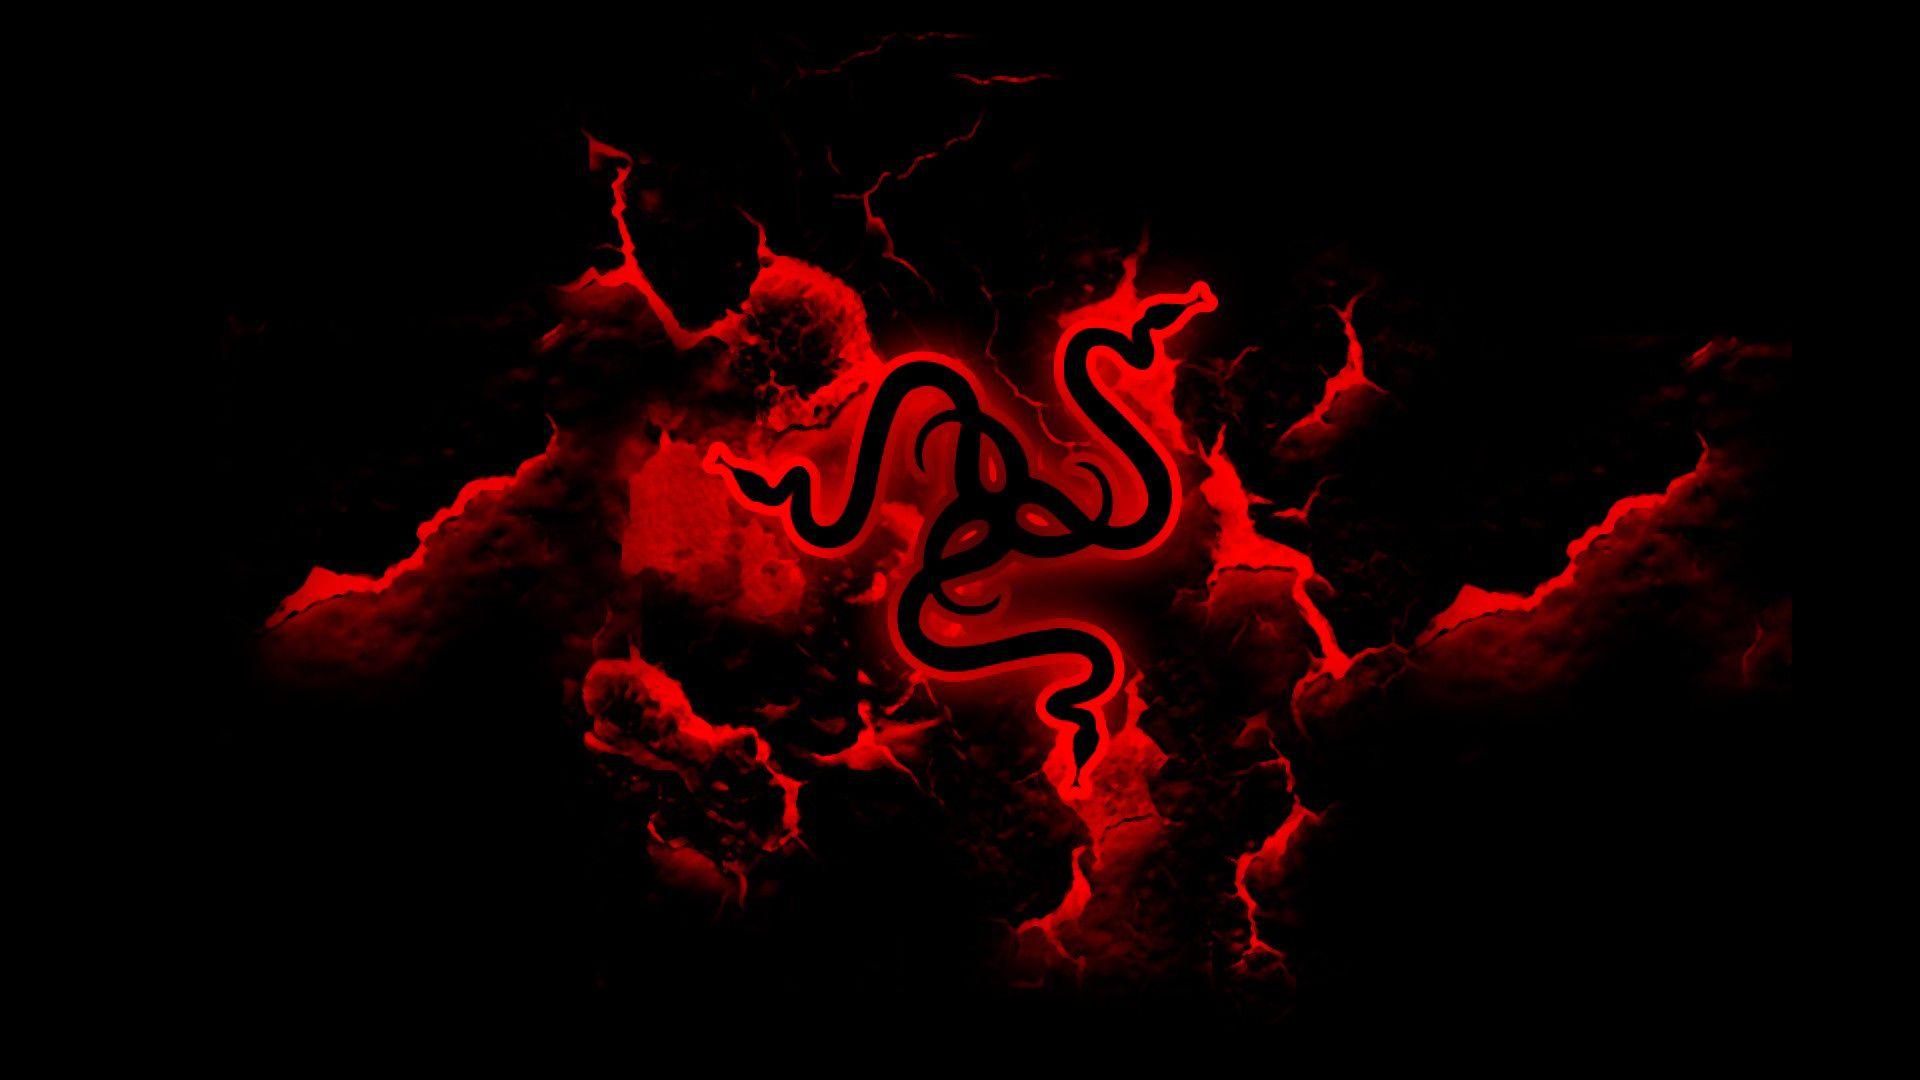 Cool Black and Red Logo - Cool Black and Red Wallpapers (59+ images)